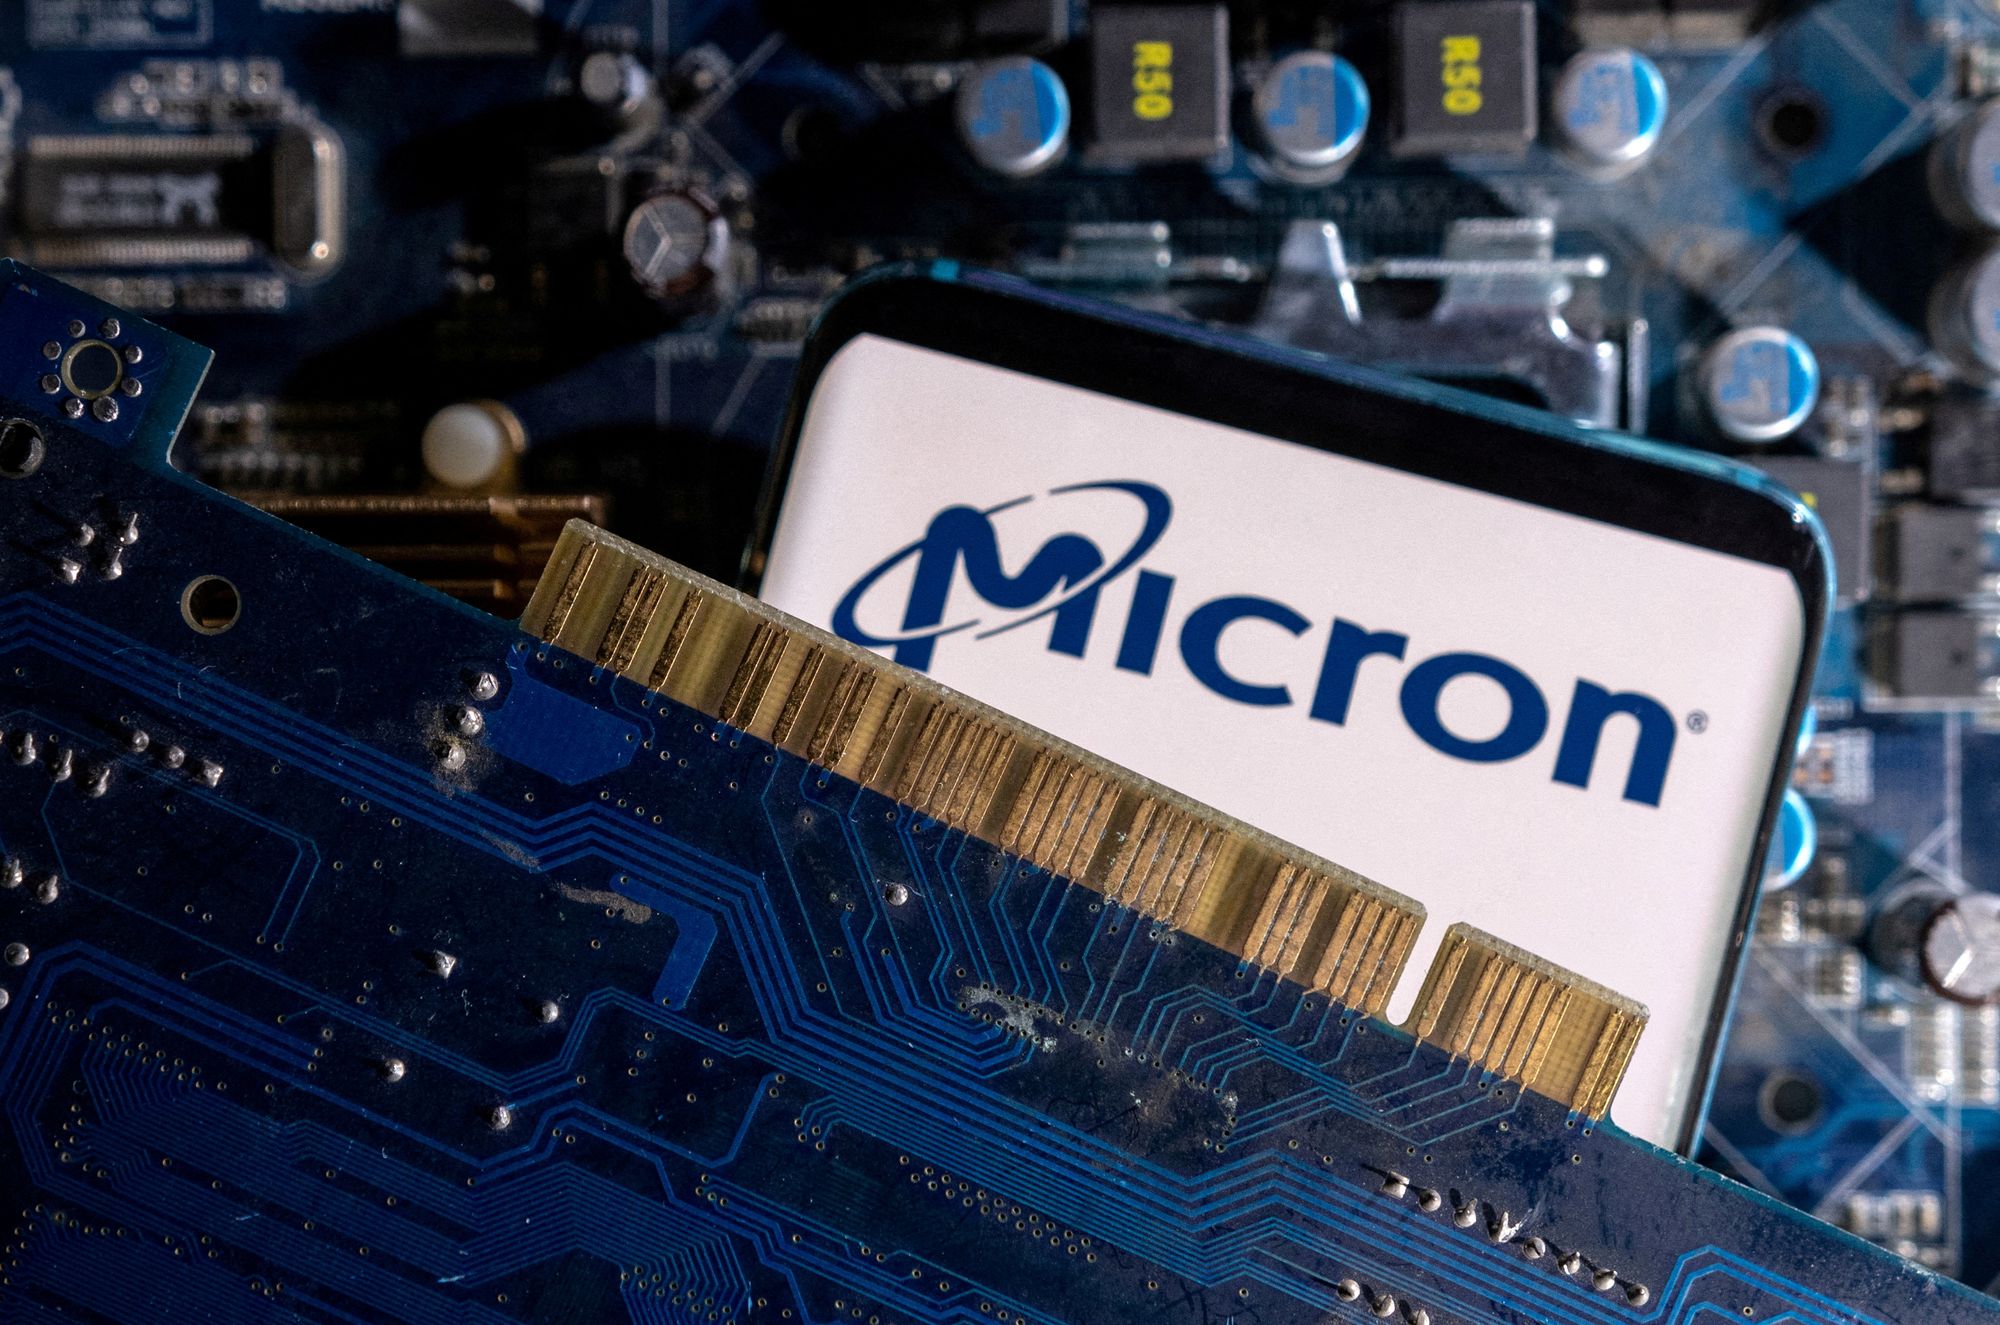 Micron chip deal in Japan